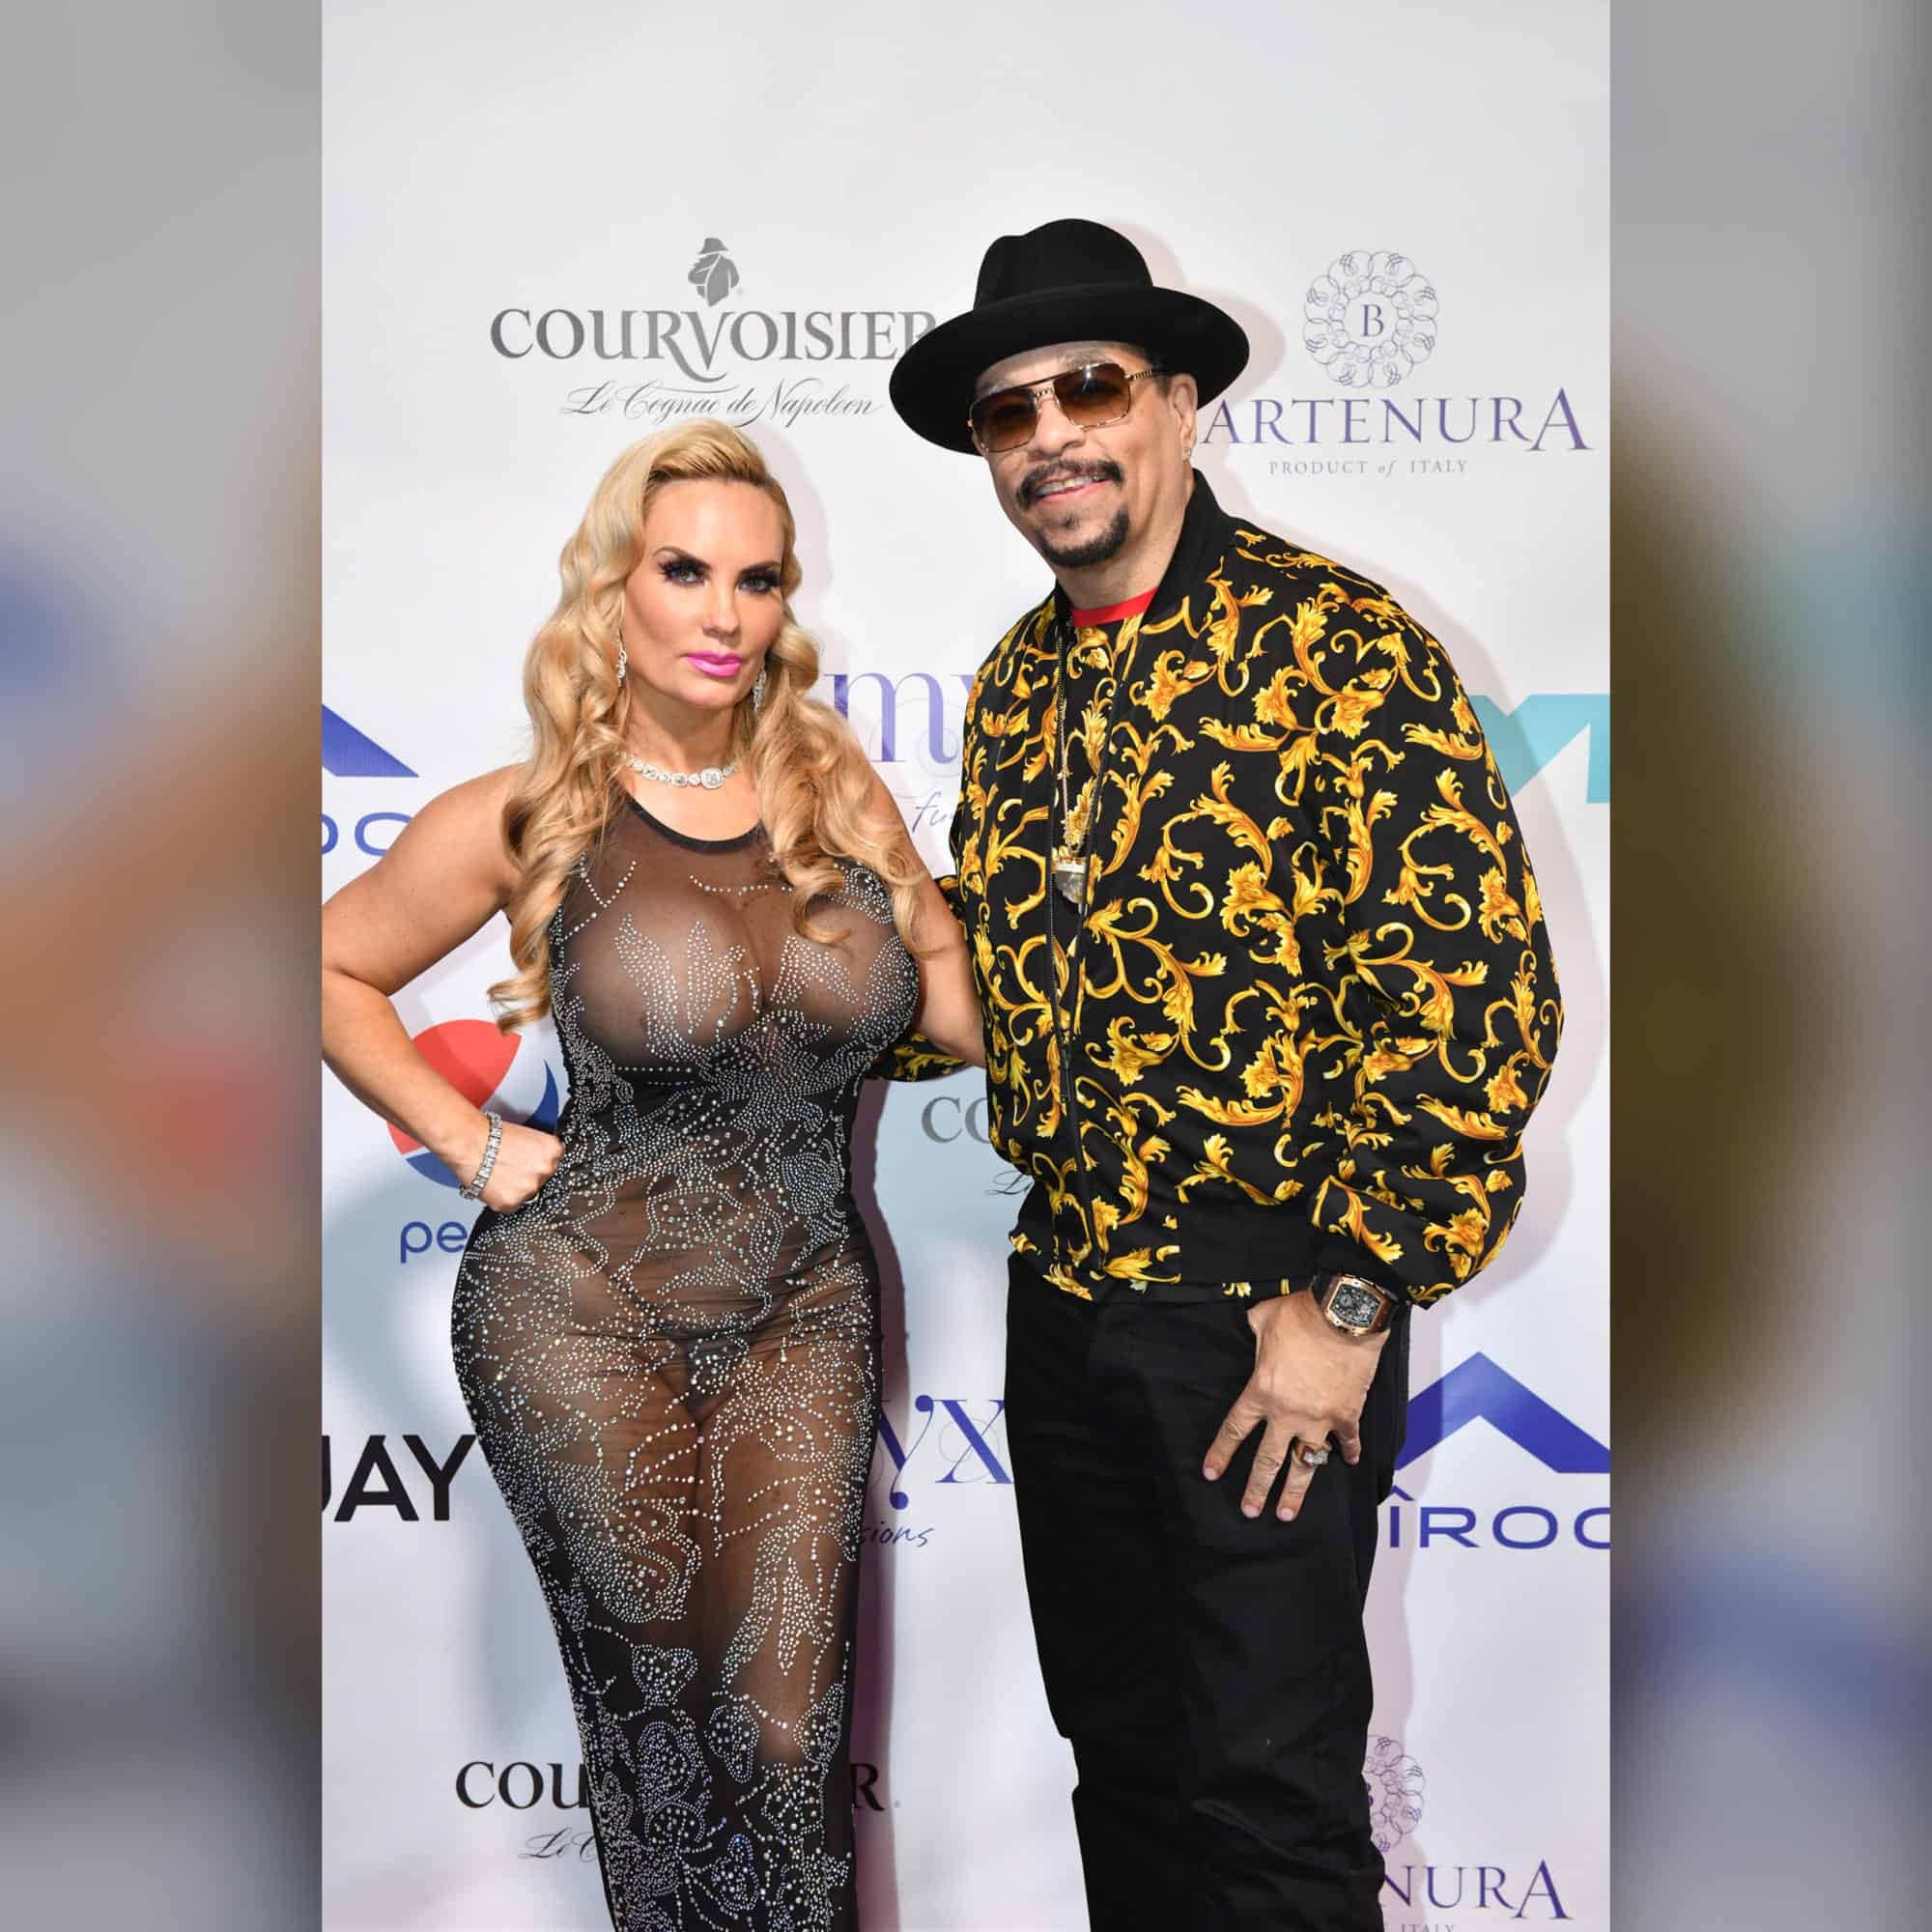 Ice-T Responds To Backlash After His photo